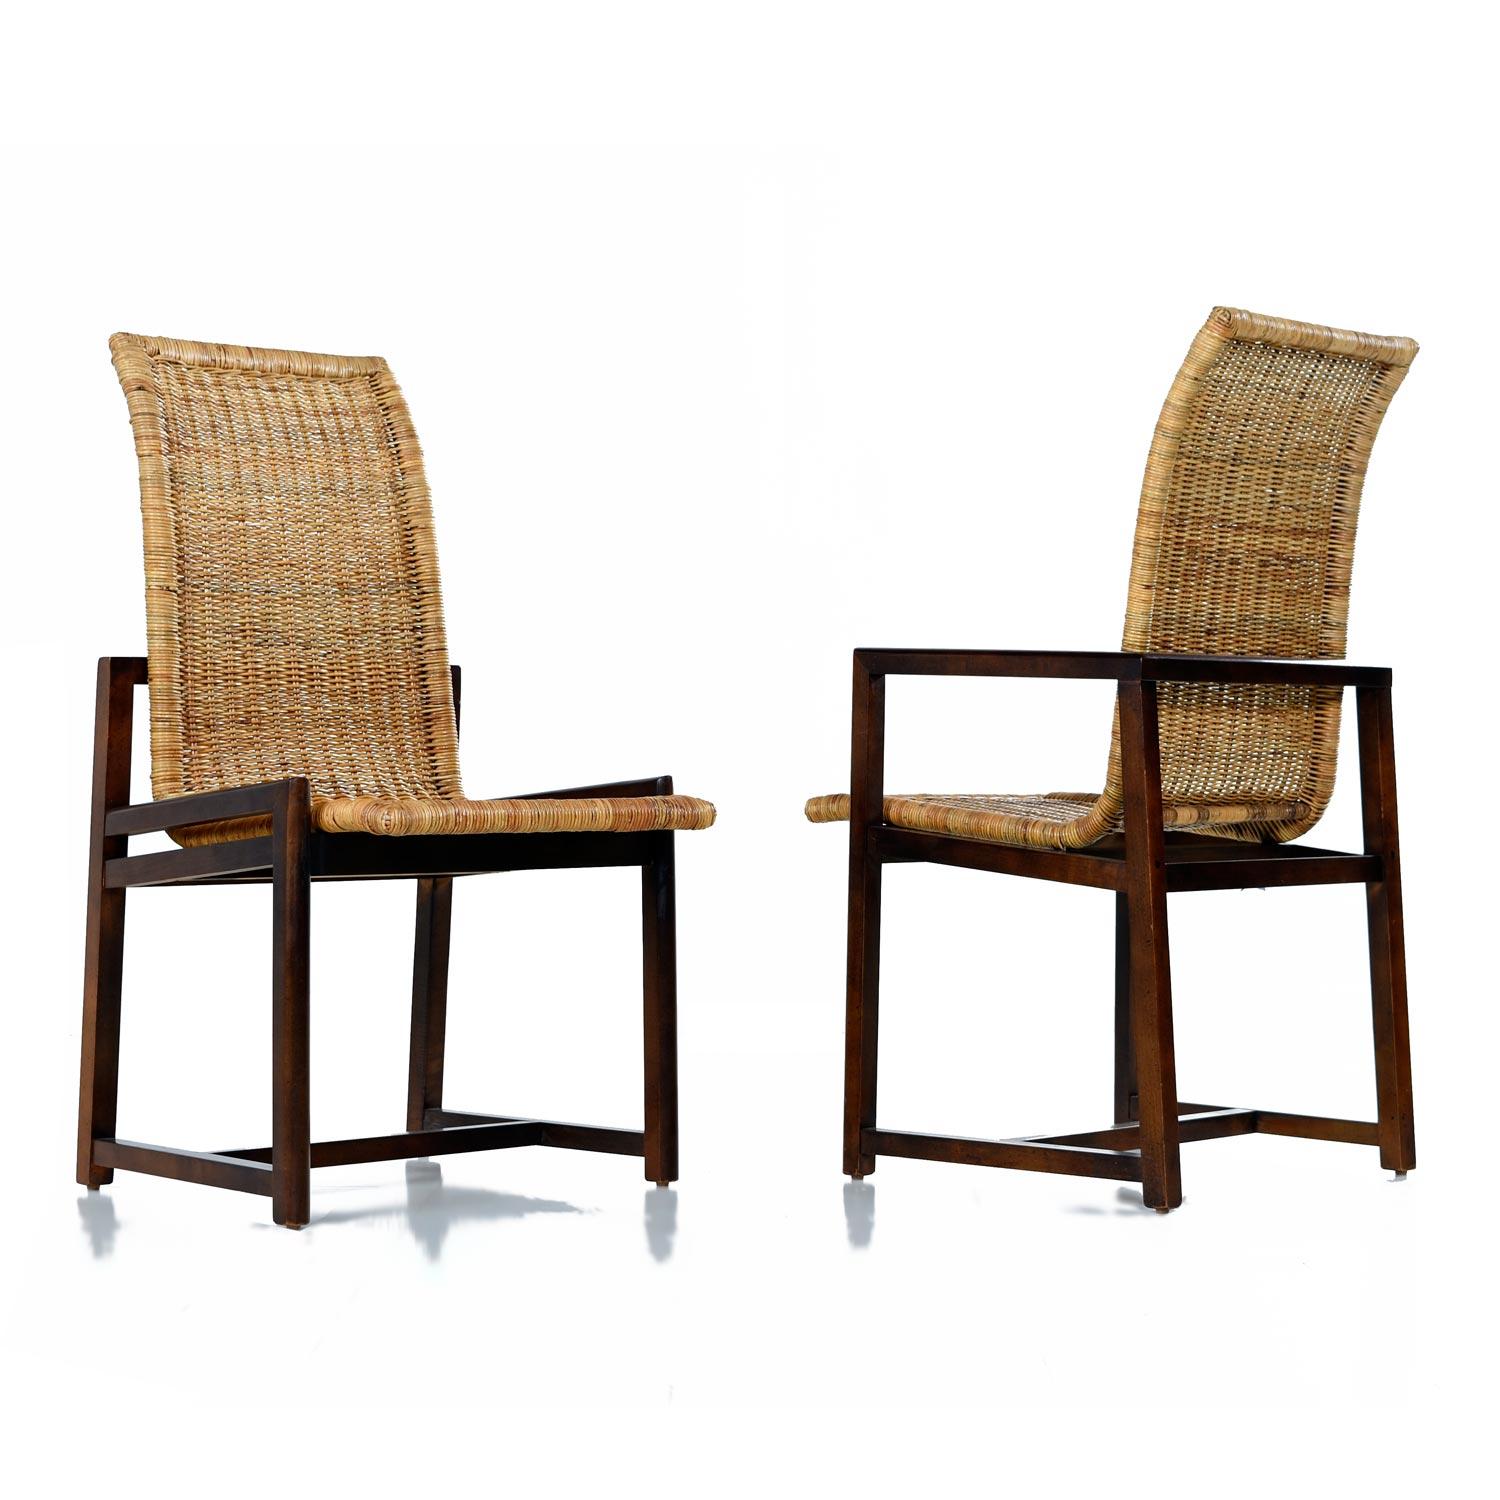 Curvaceous high back bucket seats comprised entirely of woven rattan. The dark toned beechwood frames are a handsome compliment to the woven cane. Although only subtly different, there are two armchairs in this set of six. Made by Century Furniture